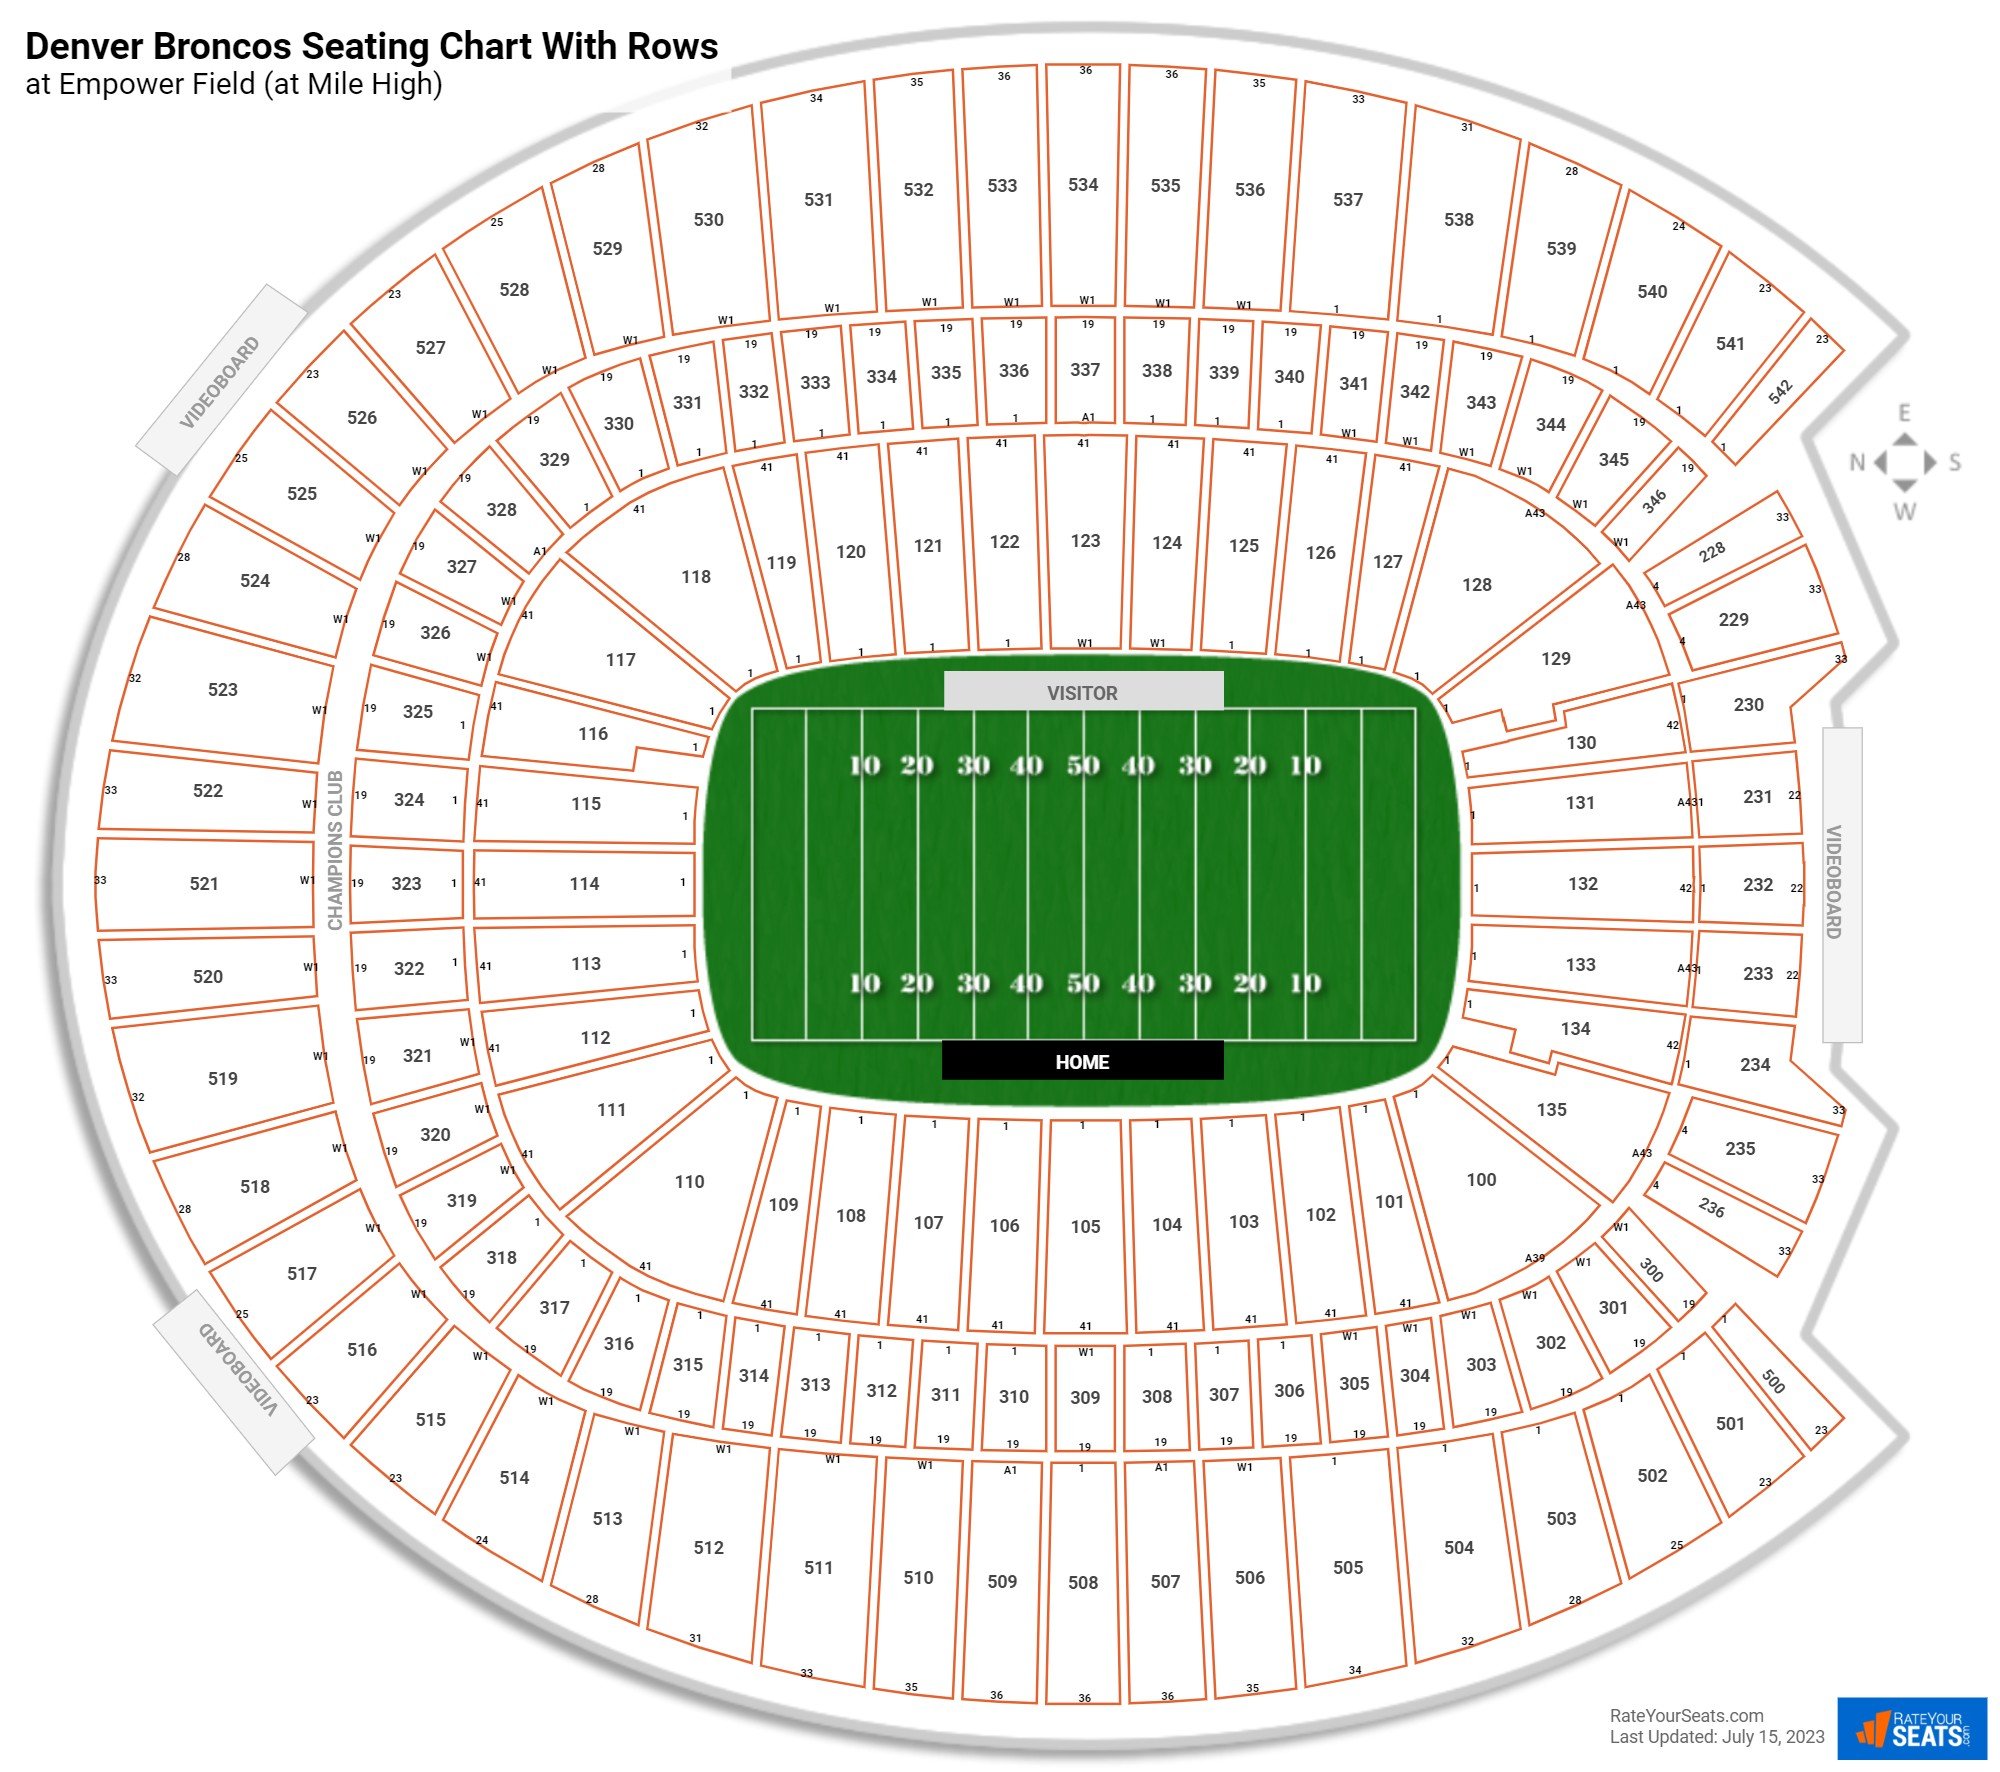 Denver Broncos Seating Chart With Rows At Empower Field (at Mile High) 